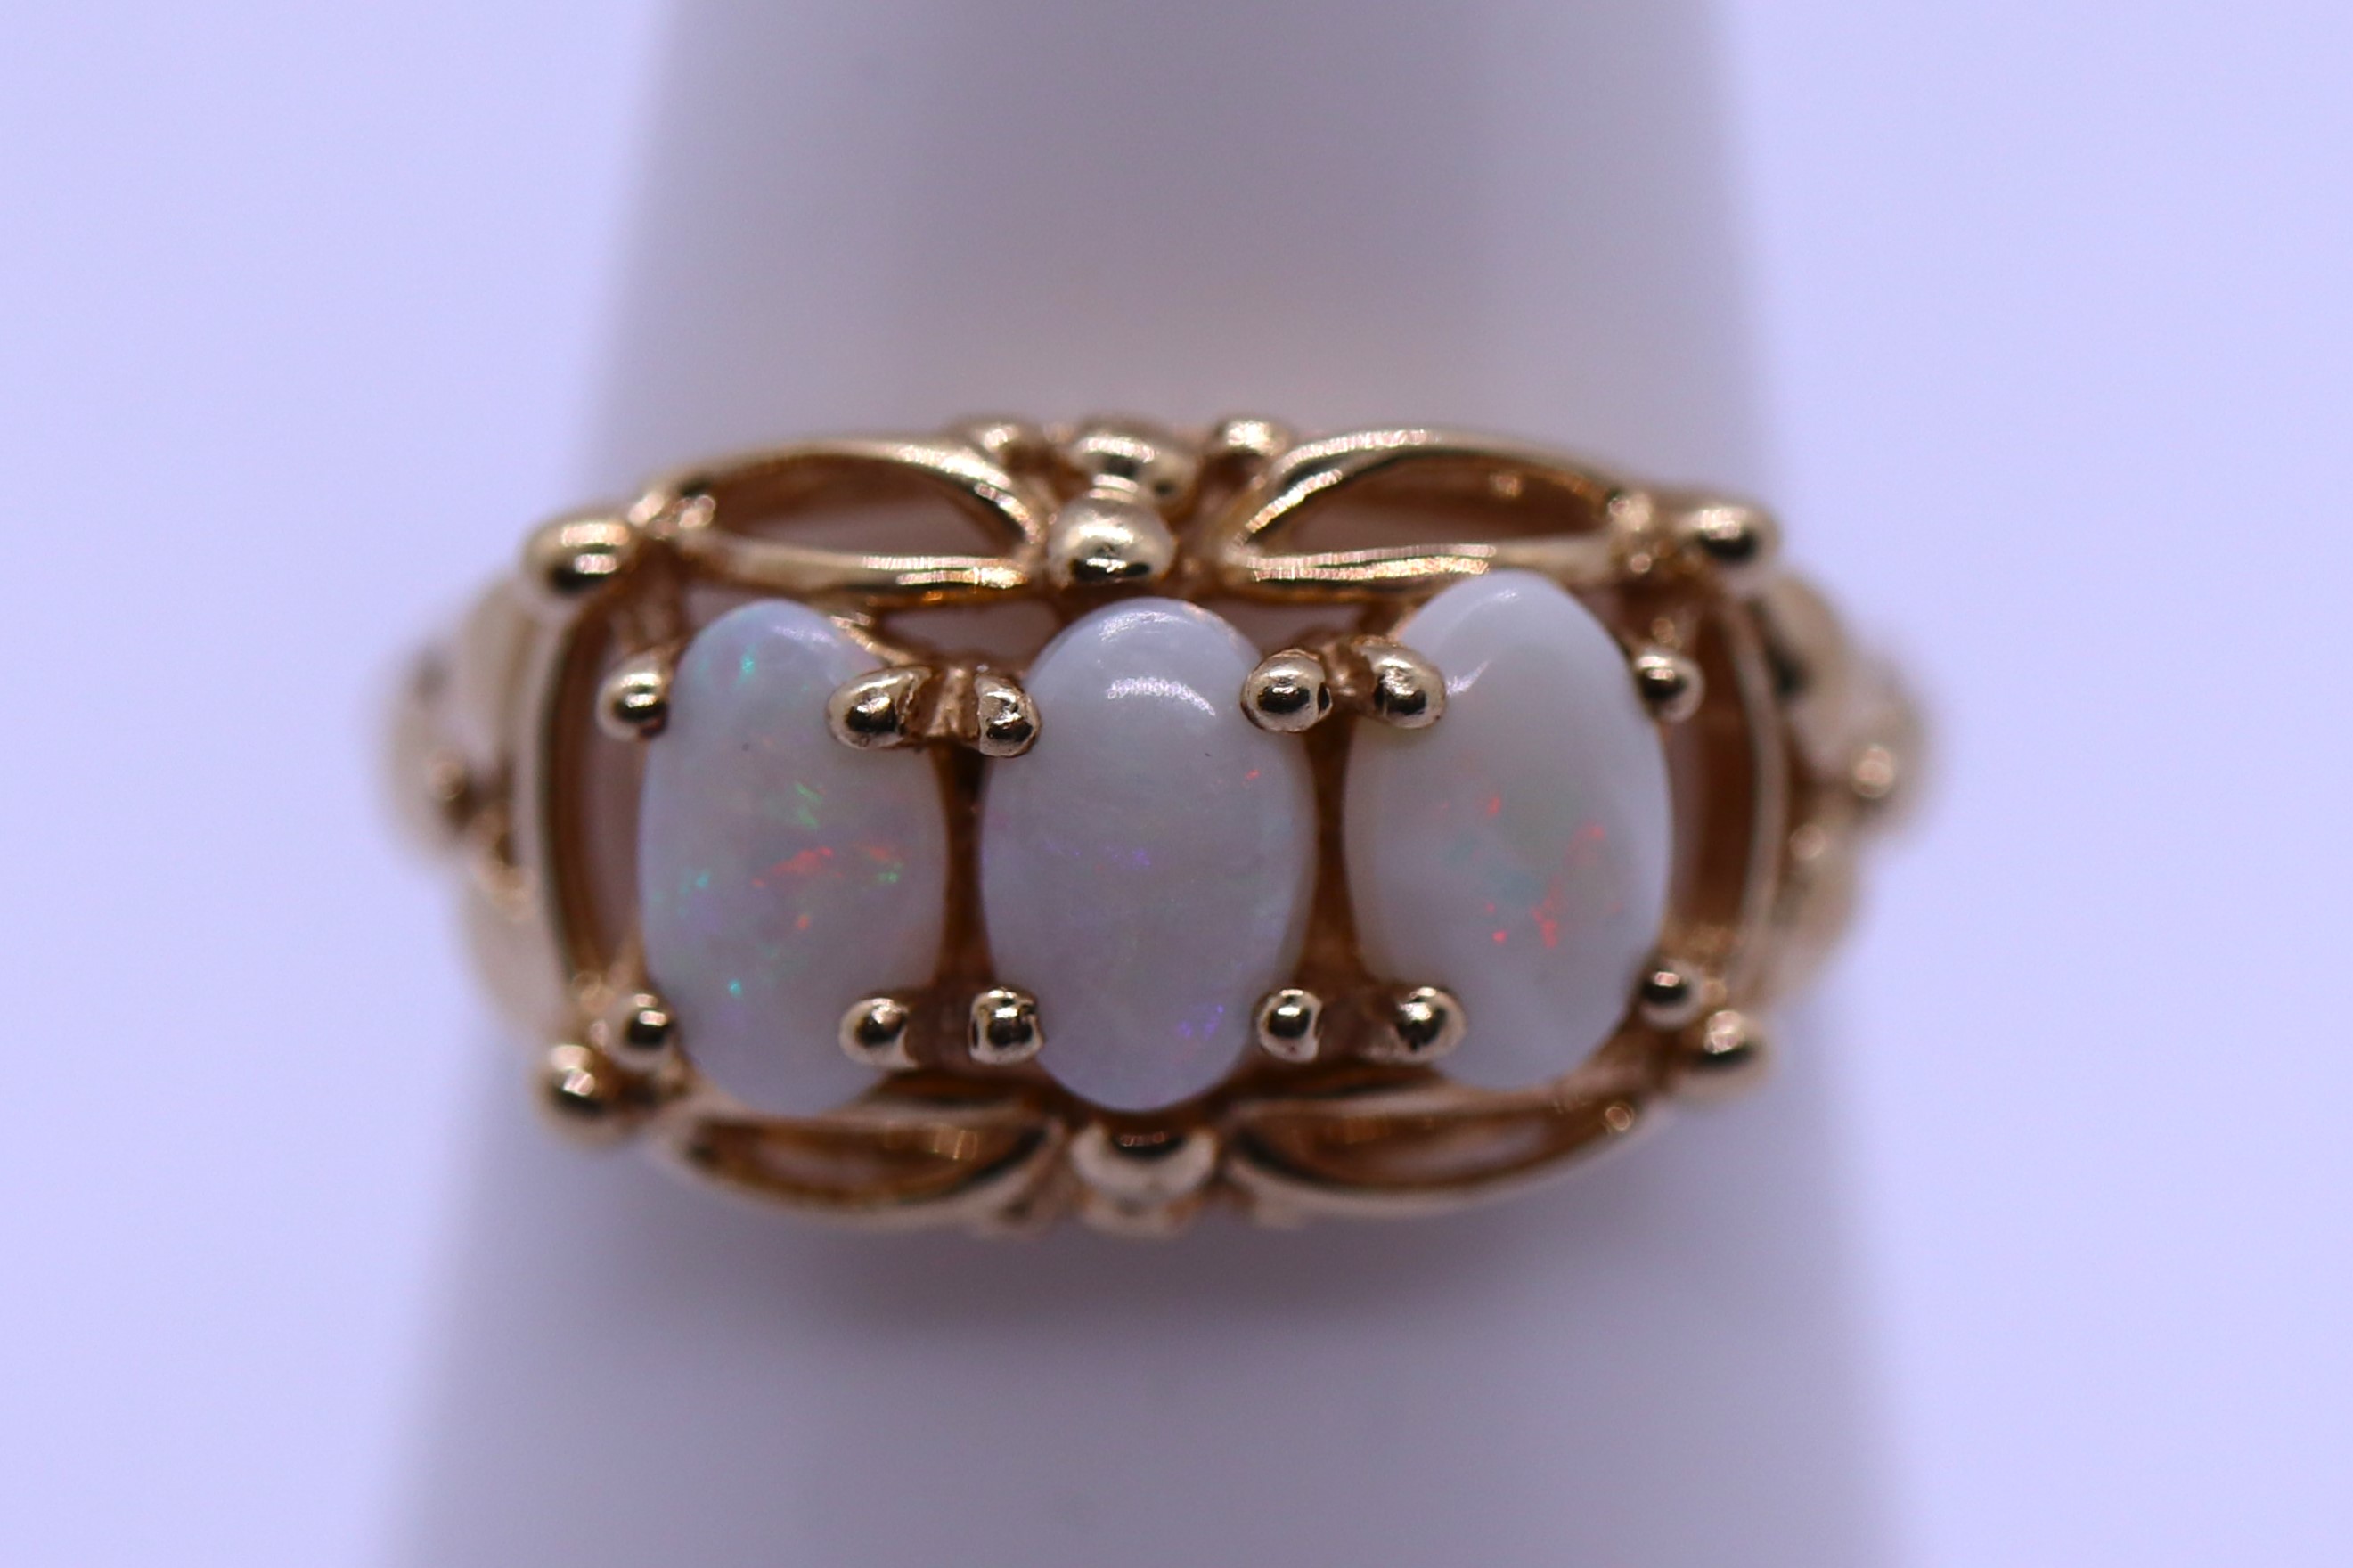 9ct gold 3 stone opal ring - Size M - Image 3 of 3